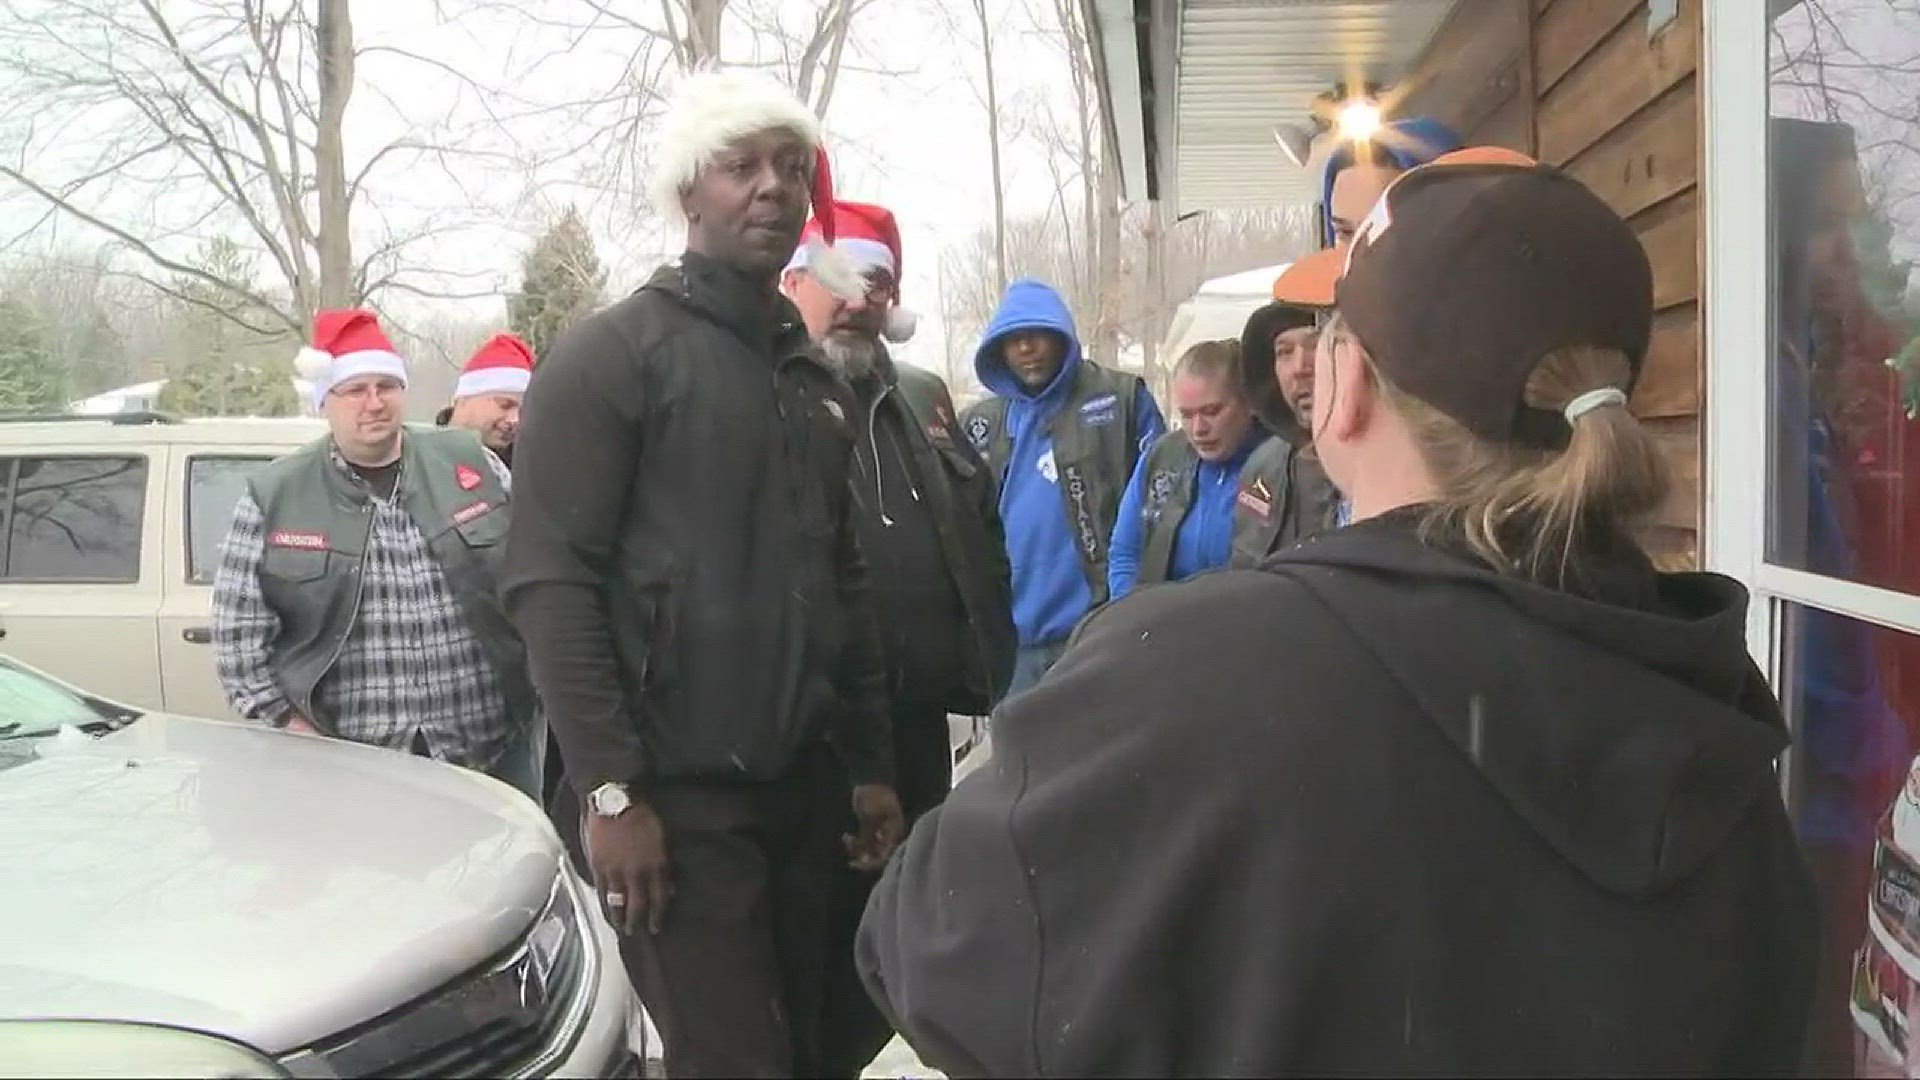 Real life Santa's with a little edge help families in Lake county